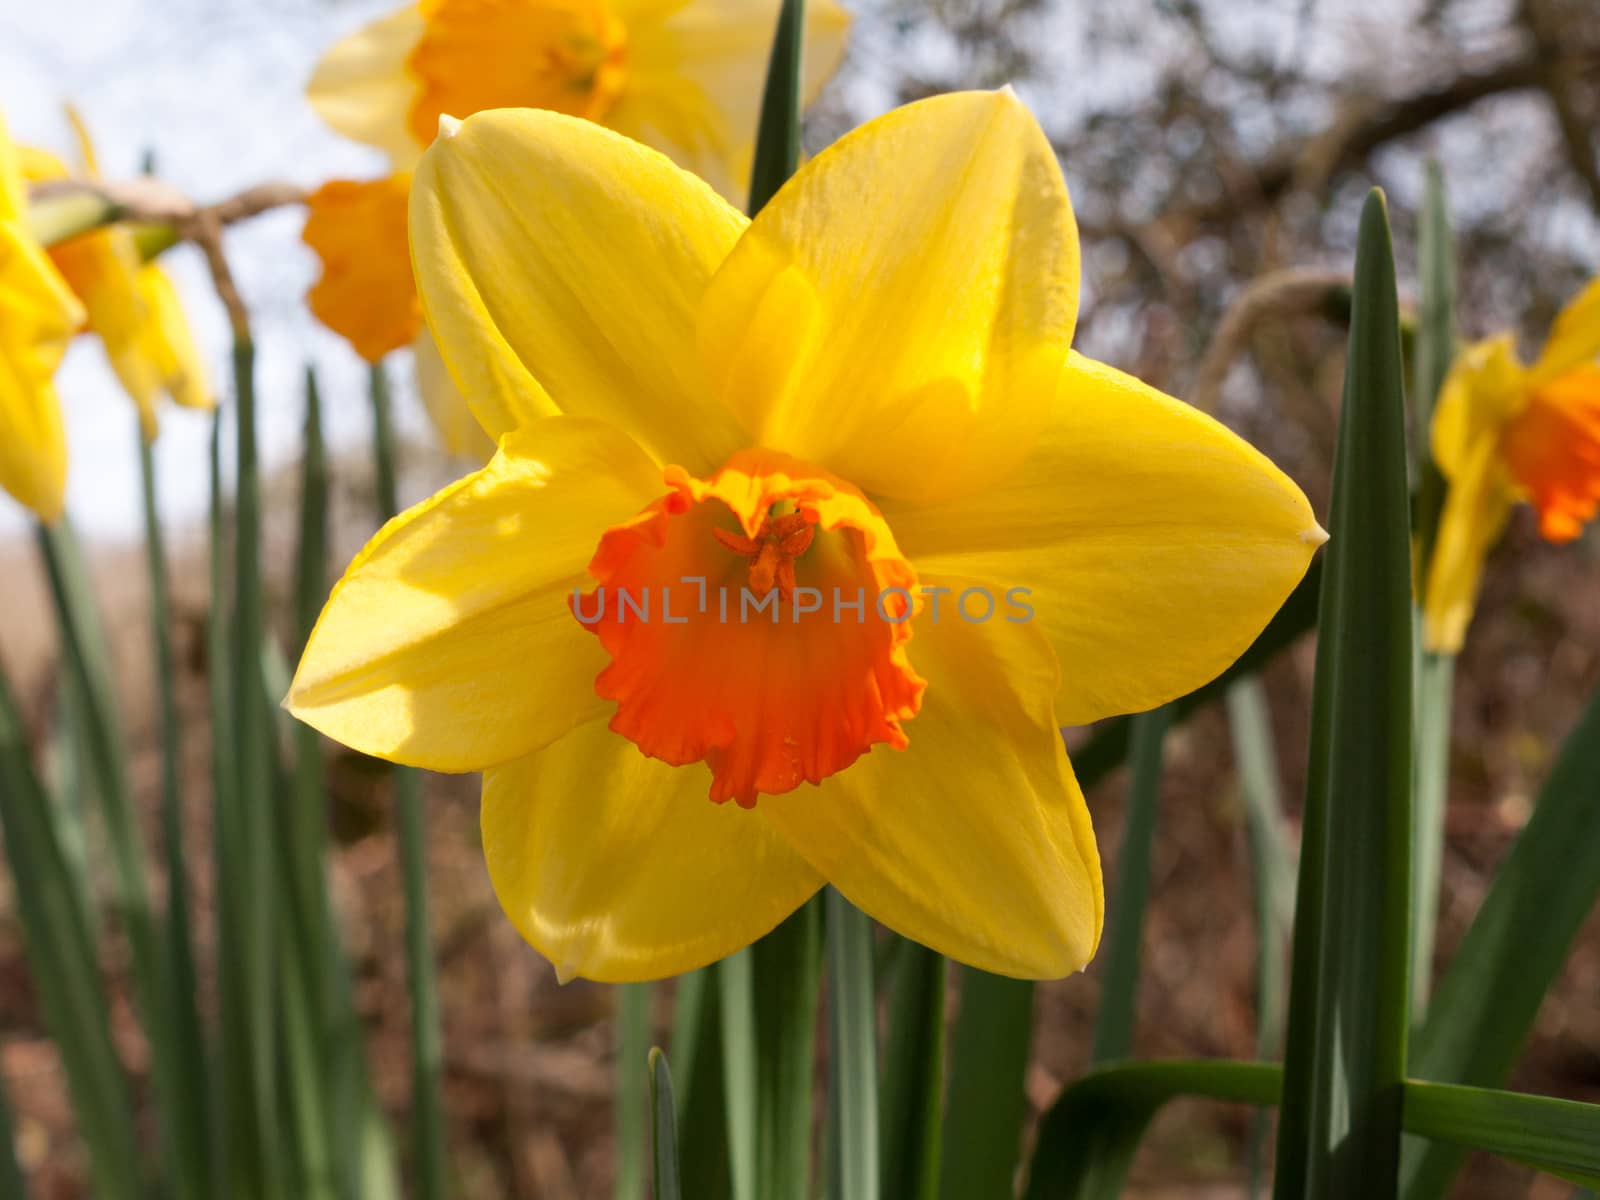 Gorgeoue Yellow Daffodils Up Close in Spring by callumrc